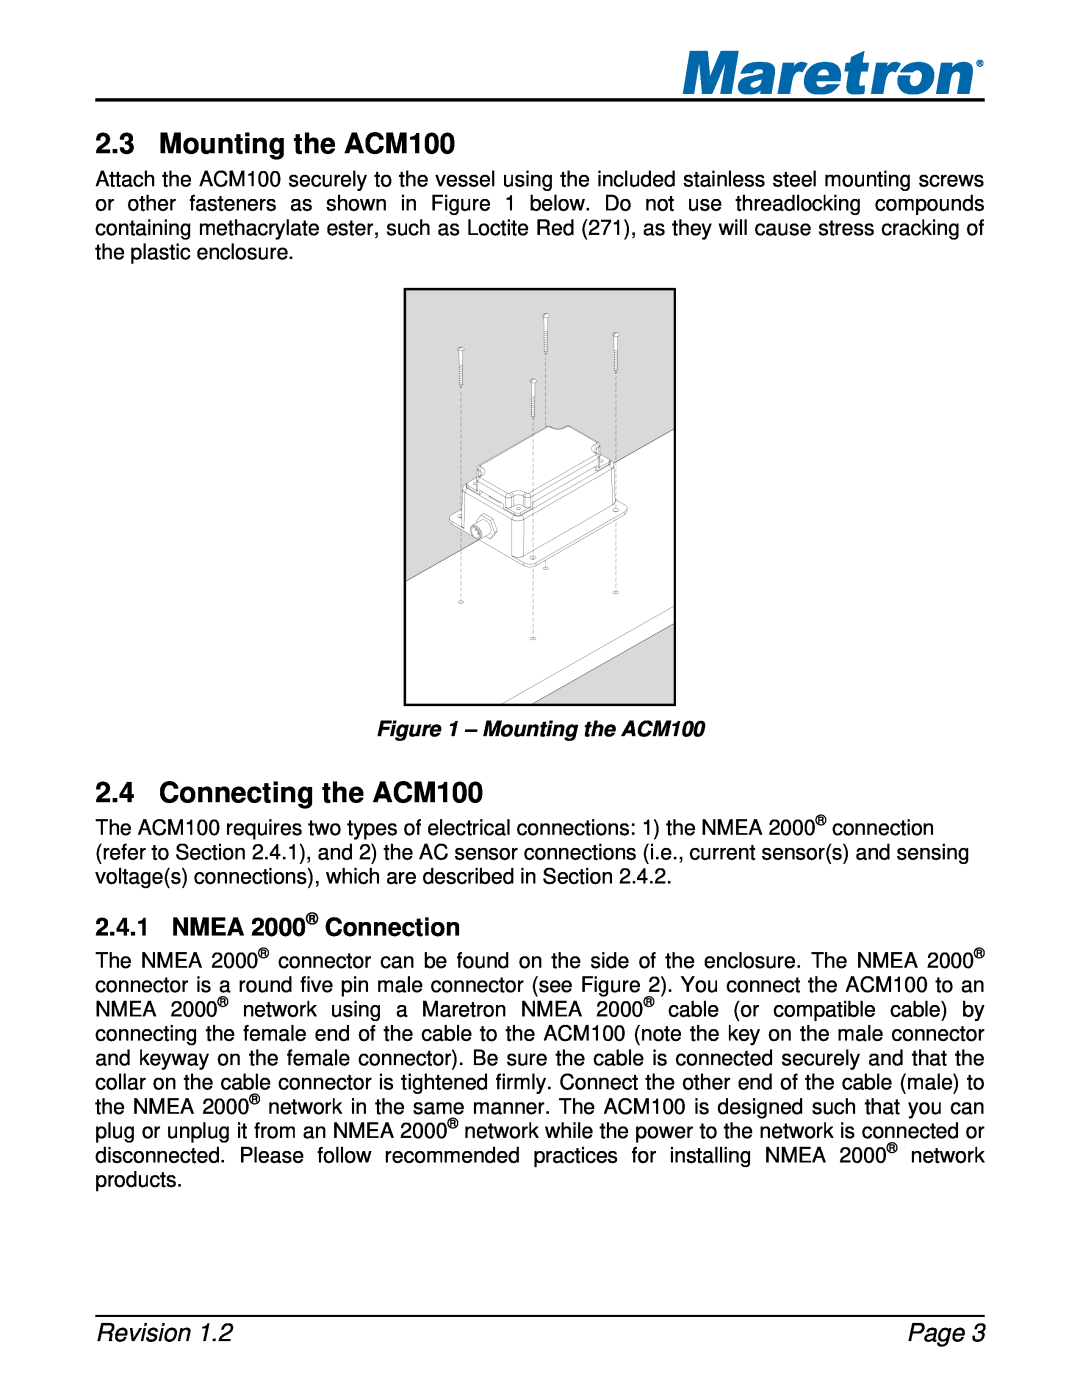 Maretron user manual Mounting the ACM100, Connecting the ACM100, NMEA 2000 Connection, Revision, Page 